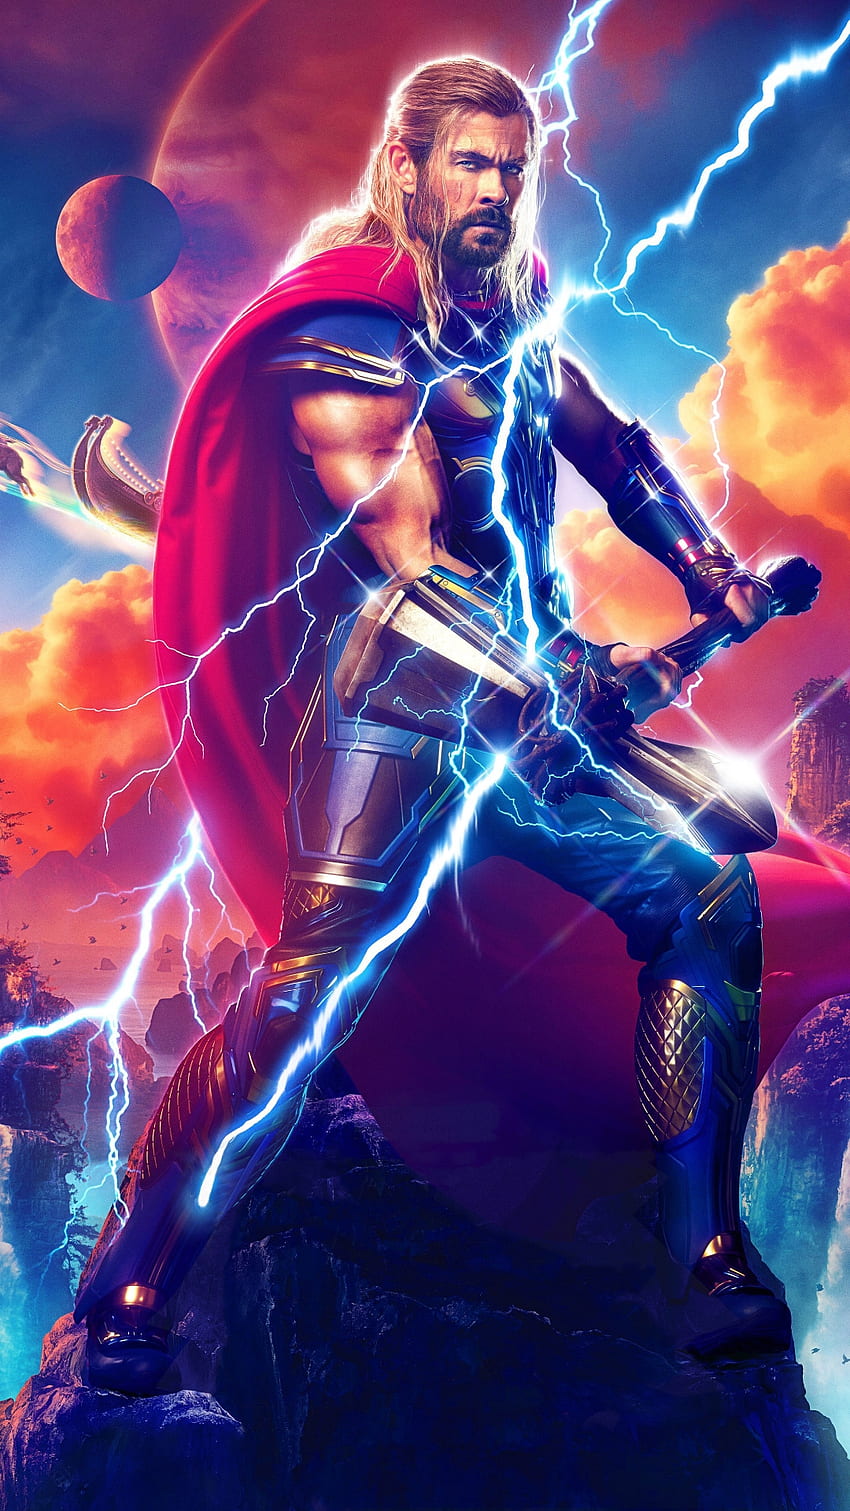 “Marvelous Compilation of Full 4K Thor Images in High Definition – Over 999 Stunning Shots!”